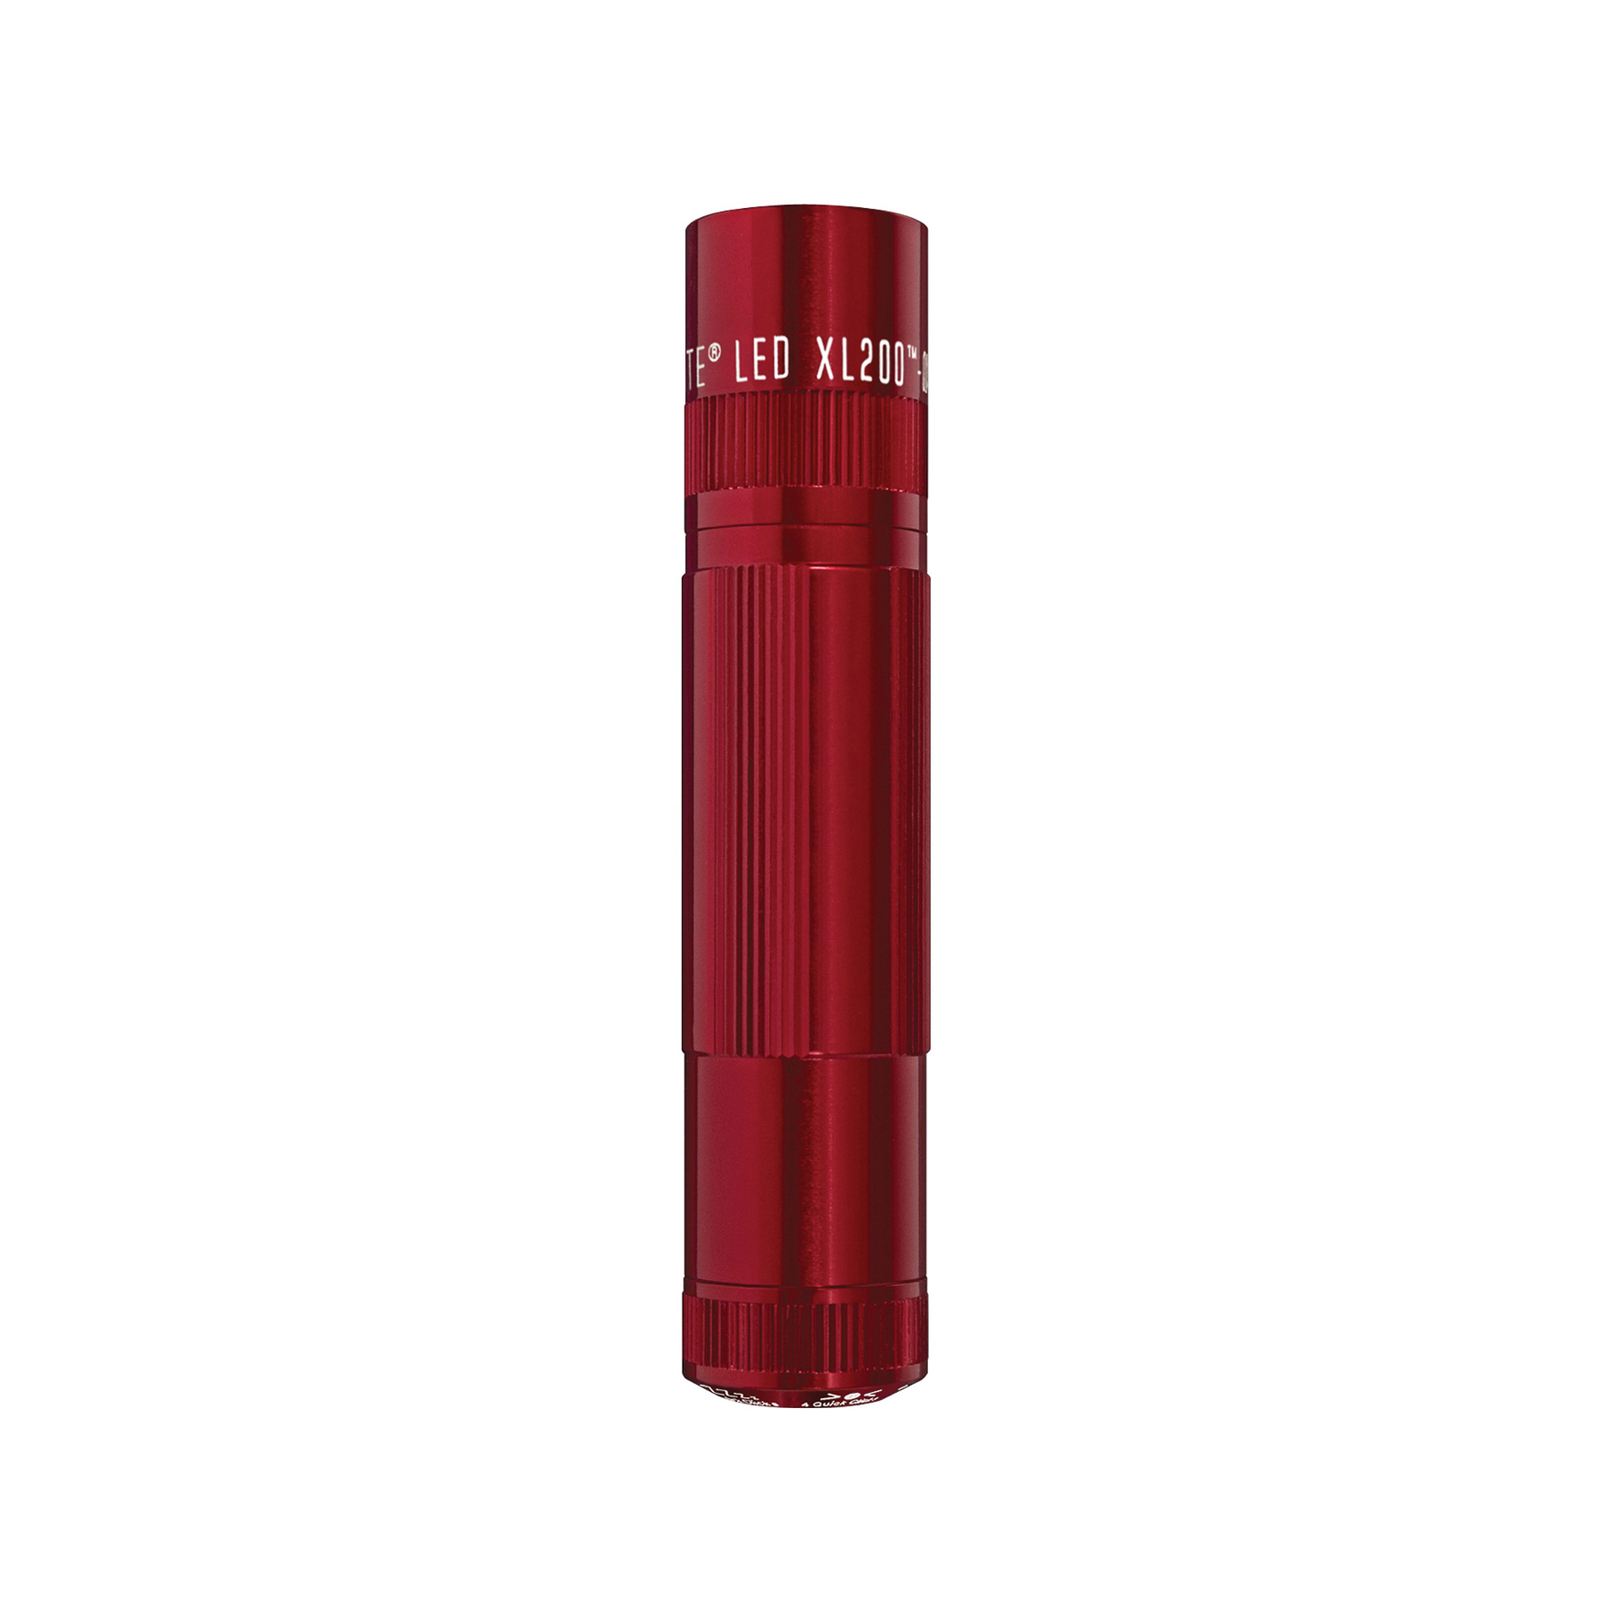 Maglite LED zaklamp XL200, 3 Cell AAA, rood